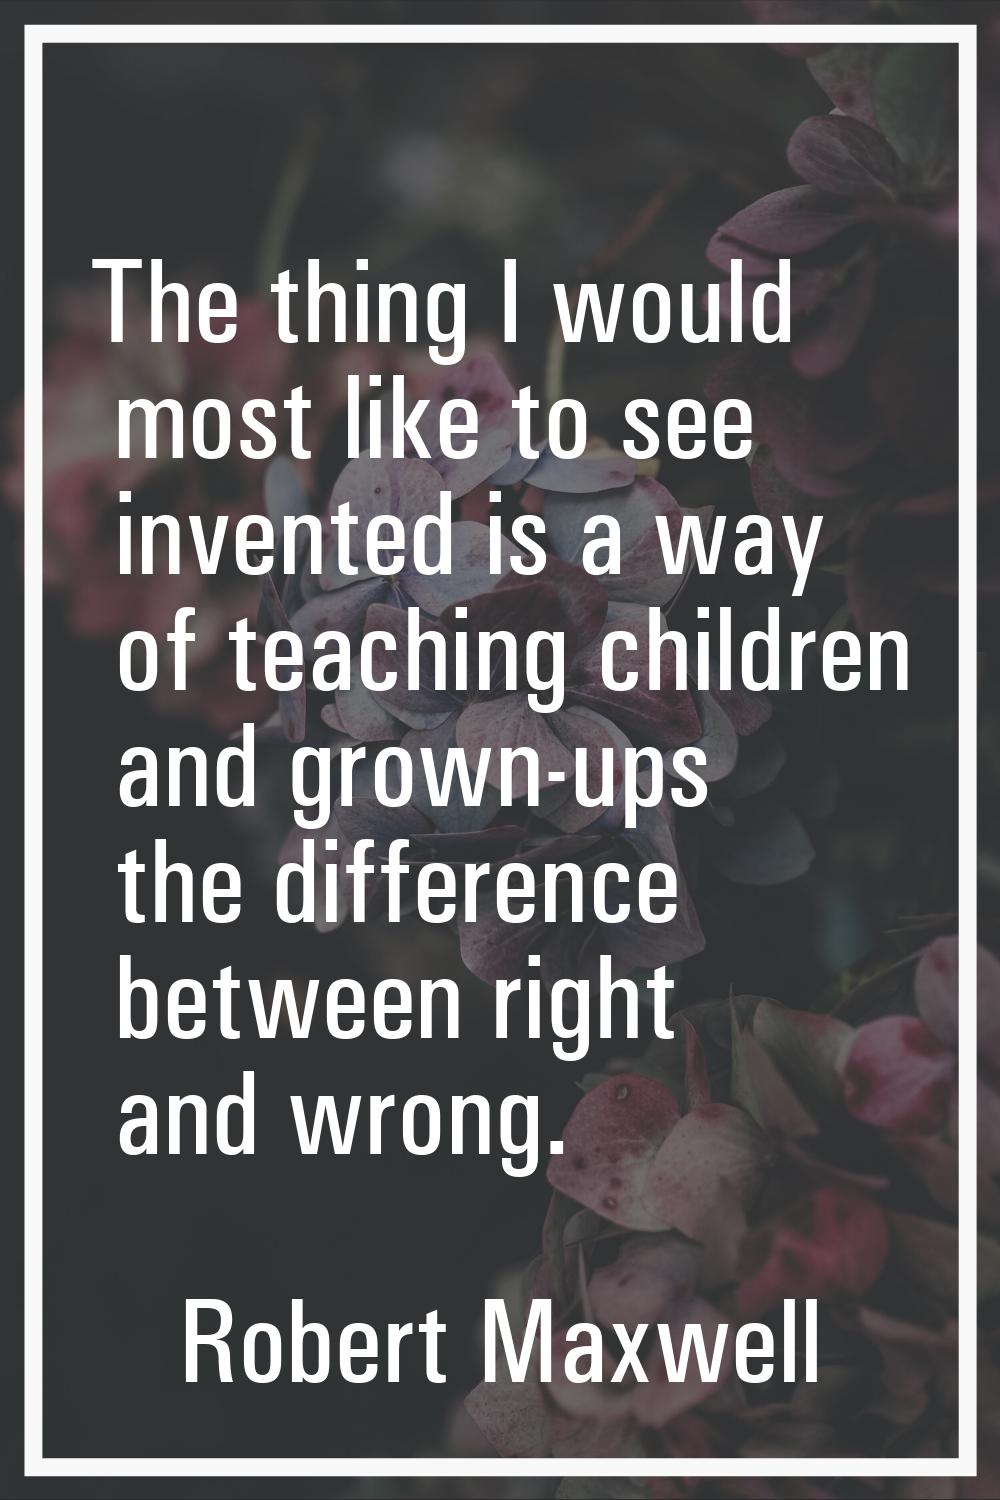 The thing I would most like to see invented is a way of teaching children and grown-ups the differe